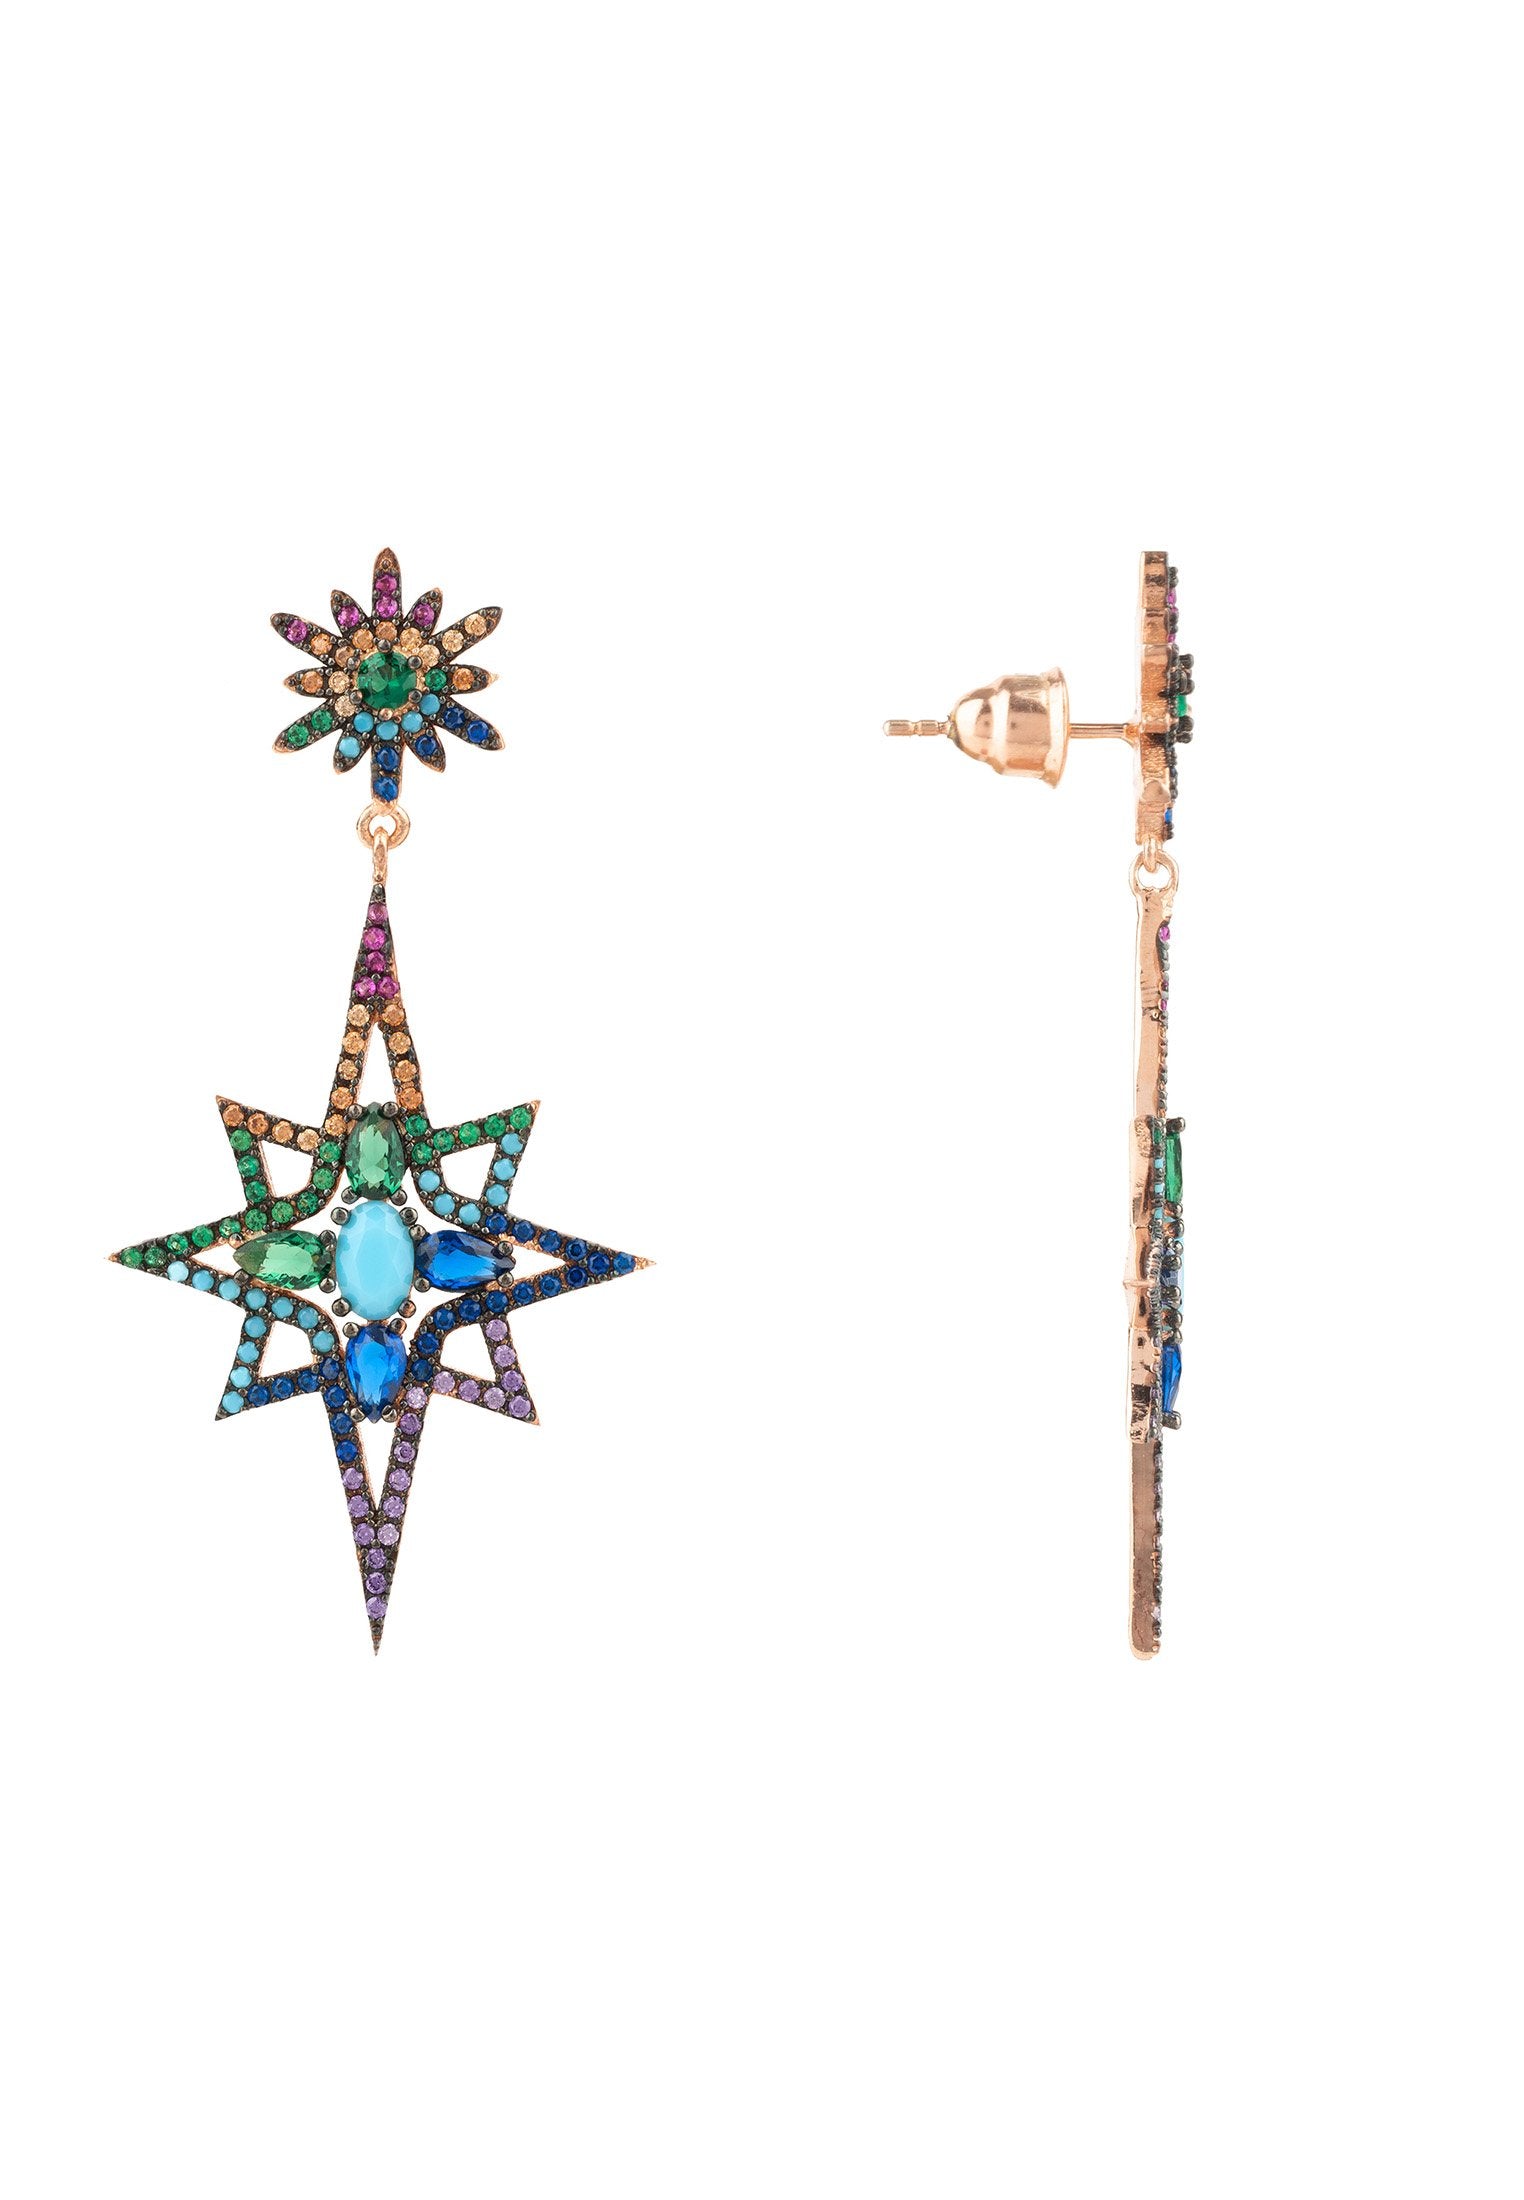 Rainbow Zircon Northern Star Burst Earrings in Rosegold - 925 Sterling Silver Jewelry for Celebrations and Weddings - Jewelry & Watches - Bijou Her -  -  - 